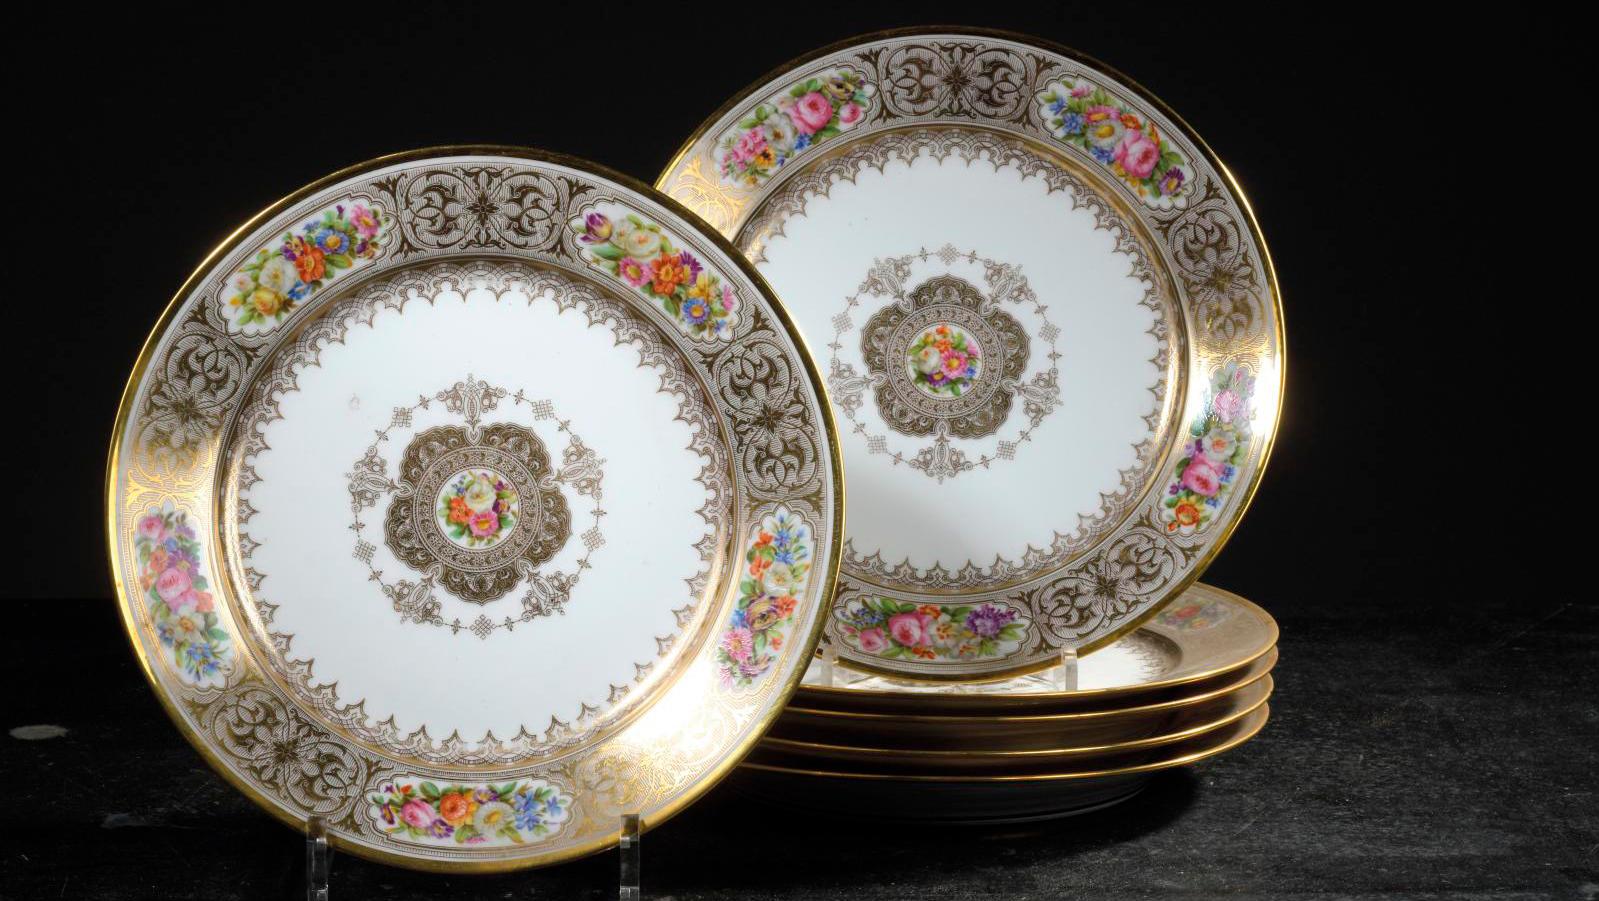 Sèvres, Louis-Philippe period, ca. 1845, set of 24 porcelain dishes from the Trianon... King Louis-Philippe’s Sèvres China Goes Back to Versailles 